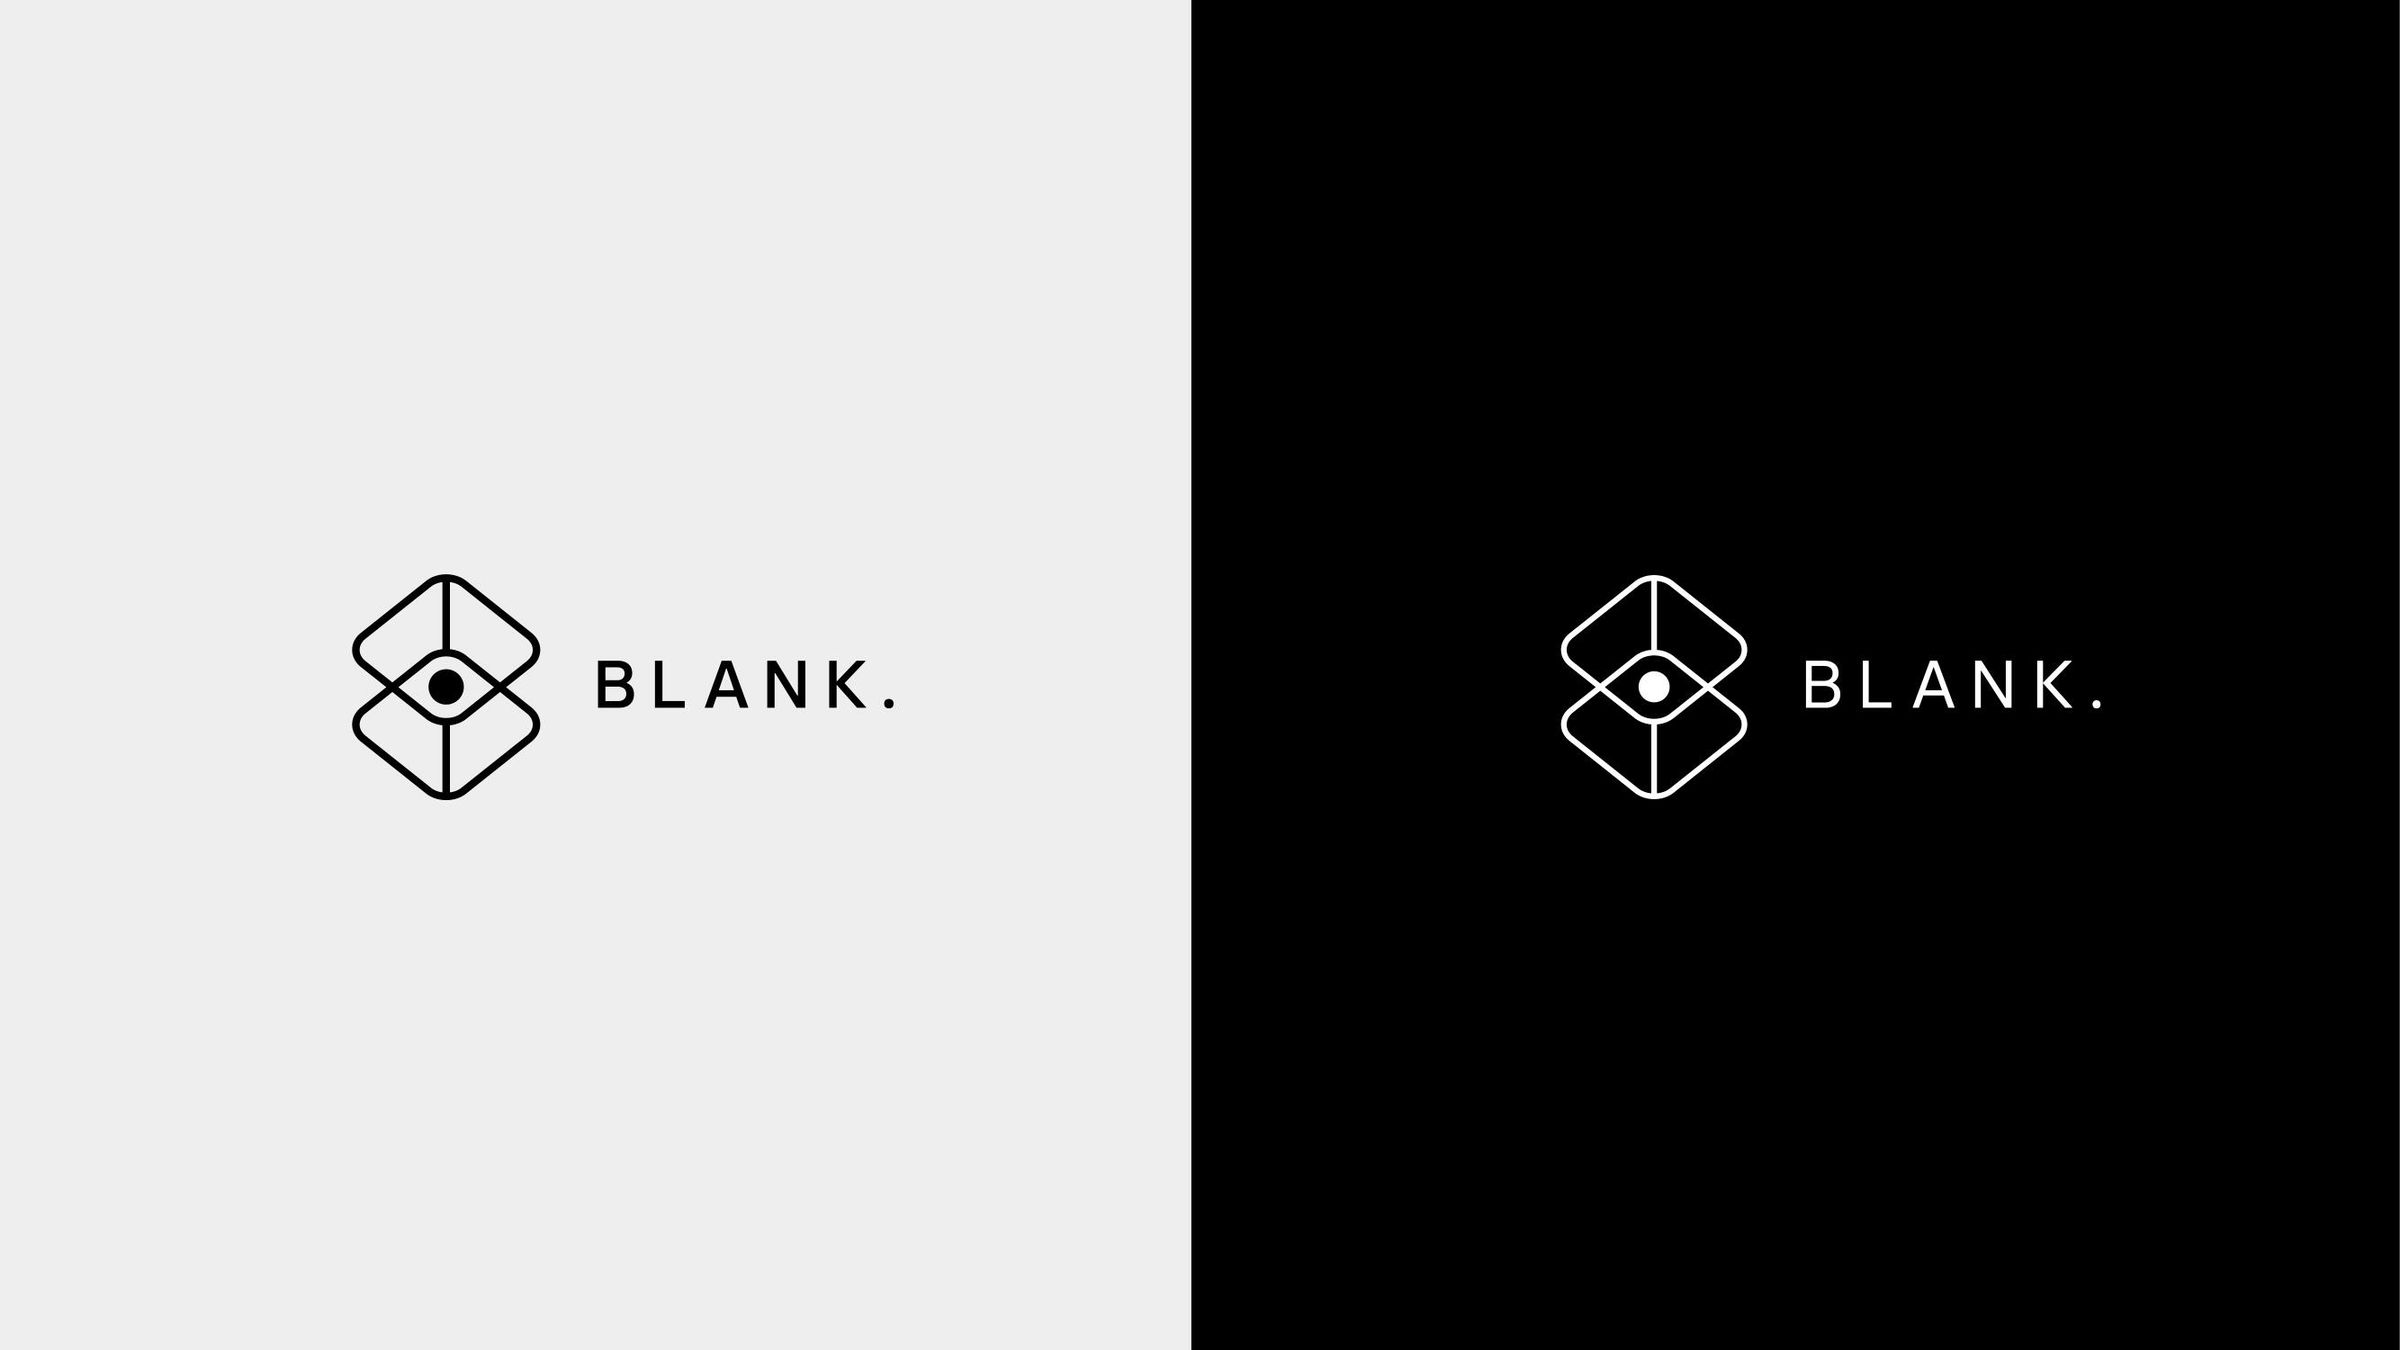 The official logo for Blank. the new studio from former CD Projeckt Red developers featuring the word “Blank” with a period